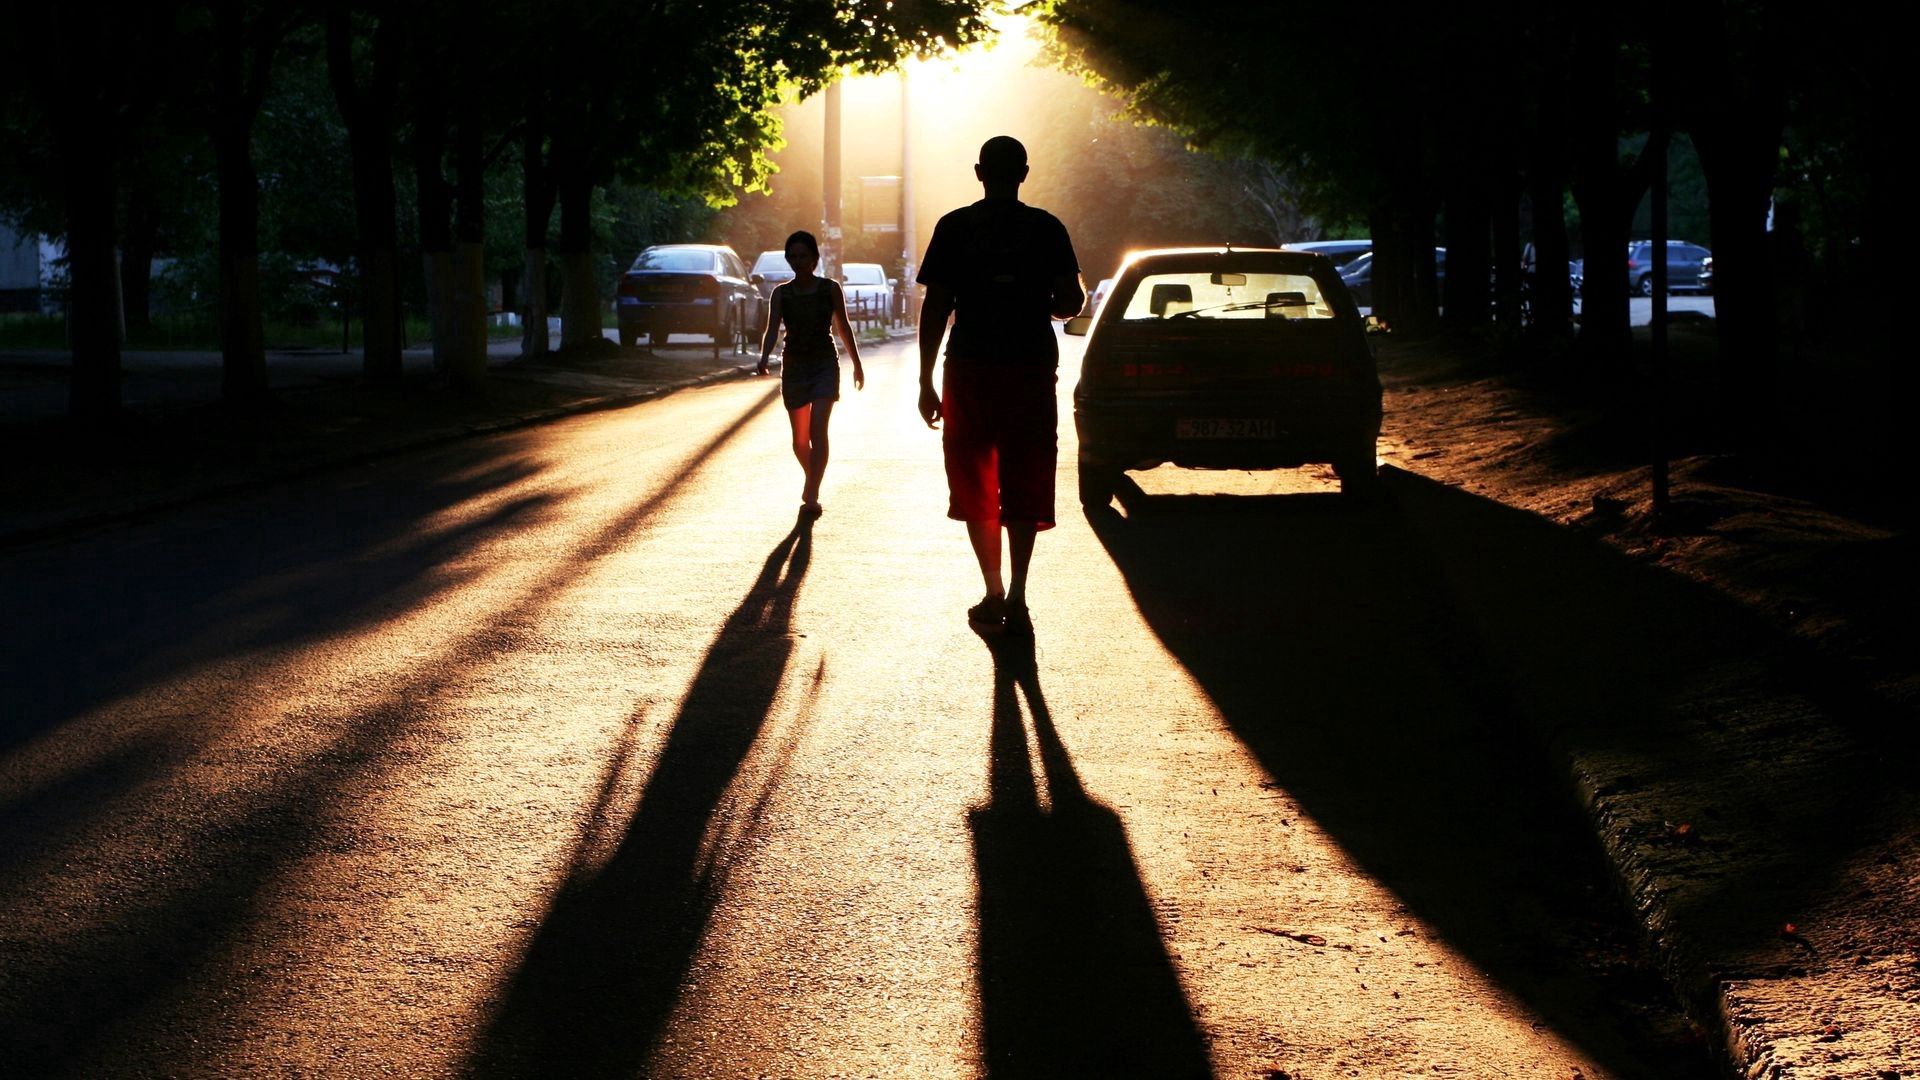 1920x1080 Background people, cars, miscellanea, miscellaneous, road, silhouettes, shadow, evening